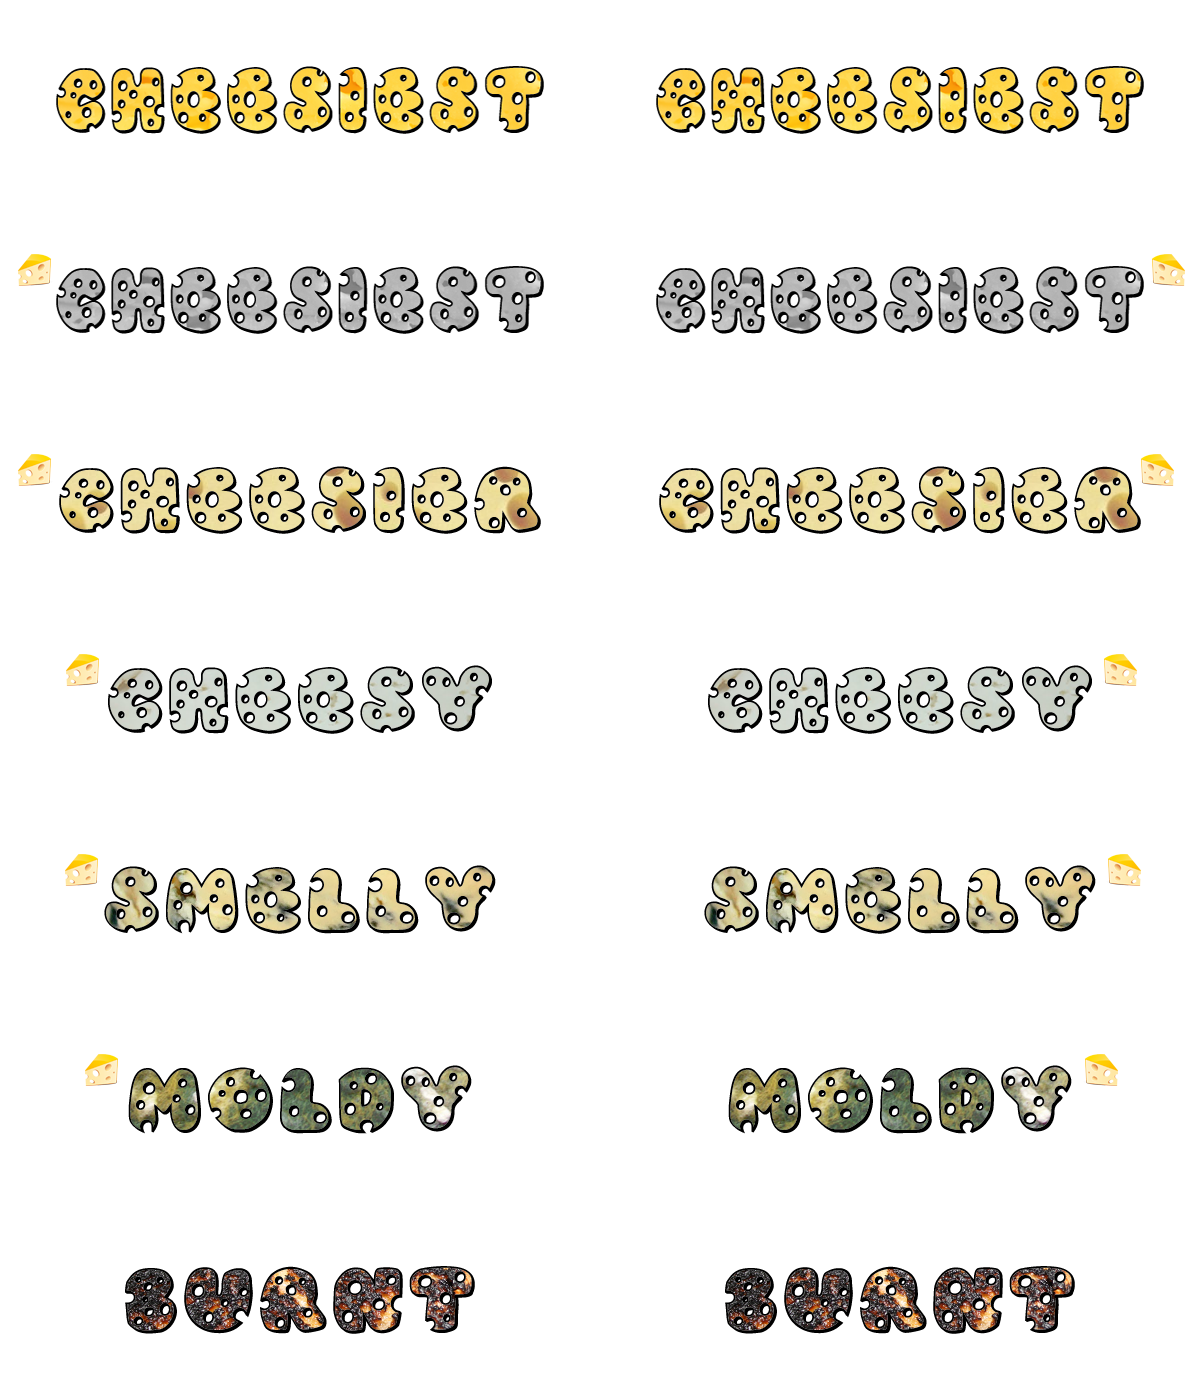 CHEESE! 2x7 (doubleres).png